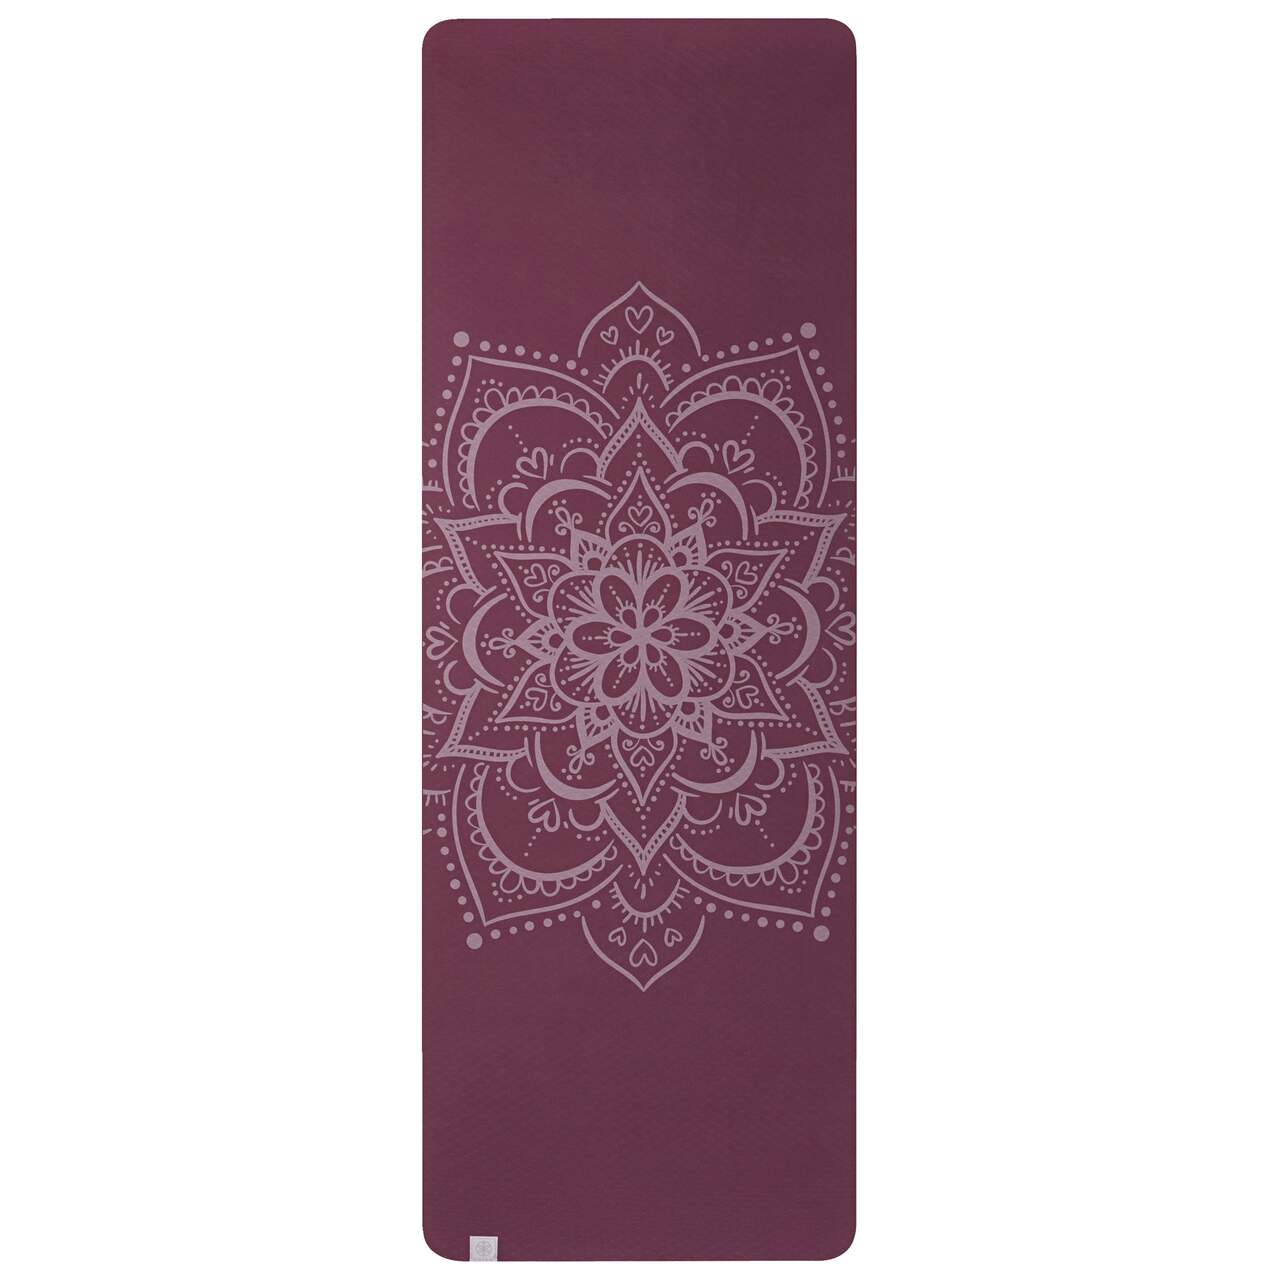 https://media-www.canadiantire.ca/product/playing/exercise/exercise-accessories/1841014/gaiam-6mm-performanceprint-tpe-yoga-mat-blush-24fa060a-379f-40d5-9022-41d28ab40522-jpgrendition.jpg?imdensity=1&imwidth=1244&impolicy=mZoom